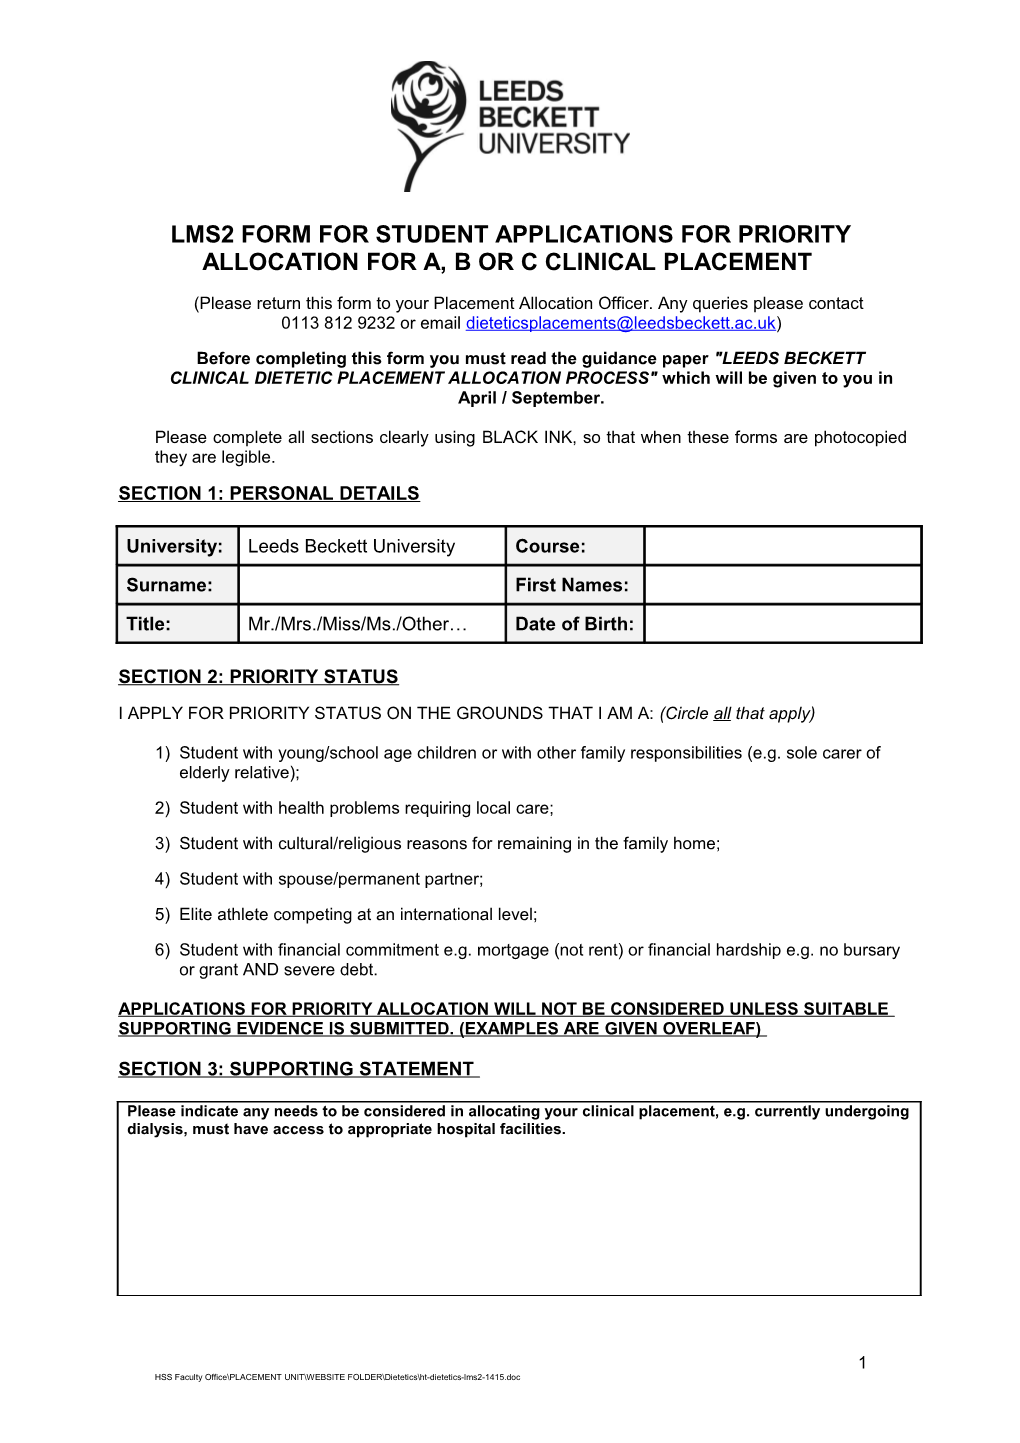 Lms2 Form for Student Applications for Priority Allocation for A, B Or C Clinical Placement